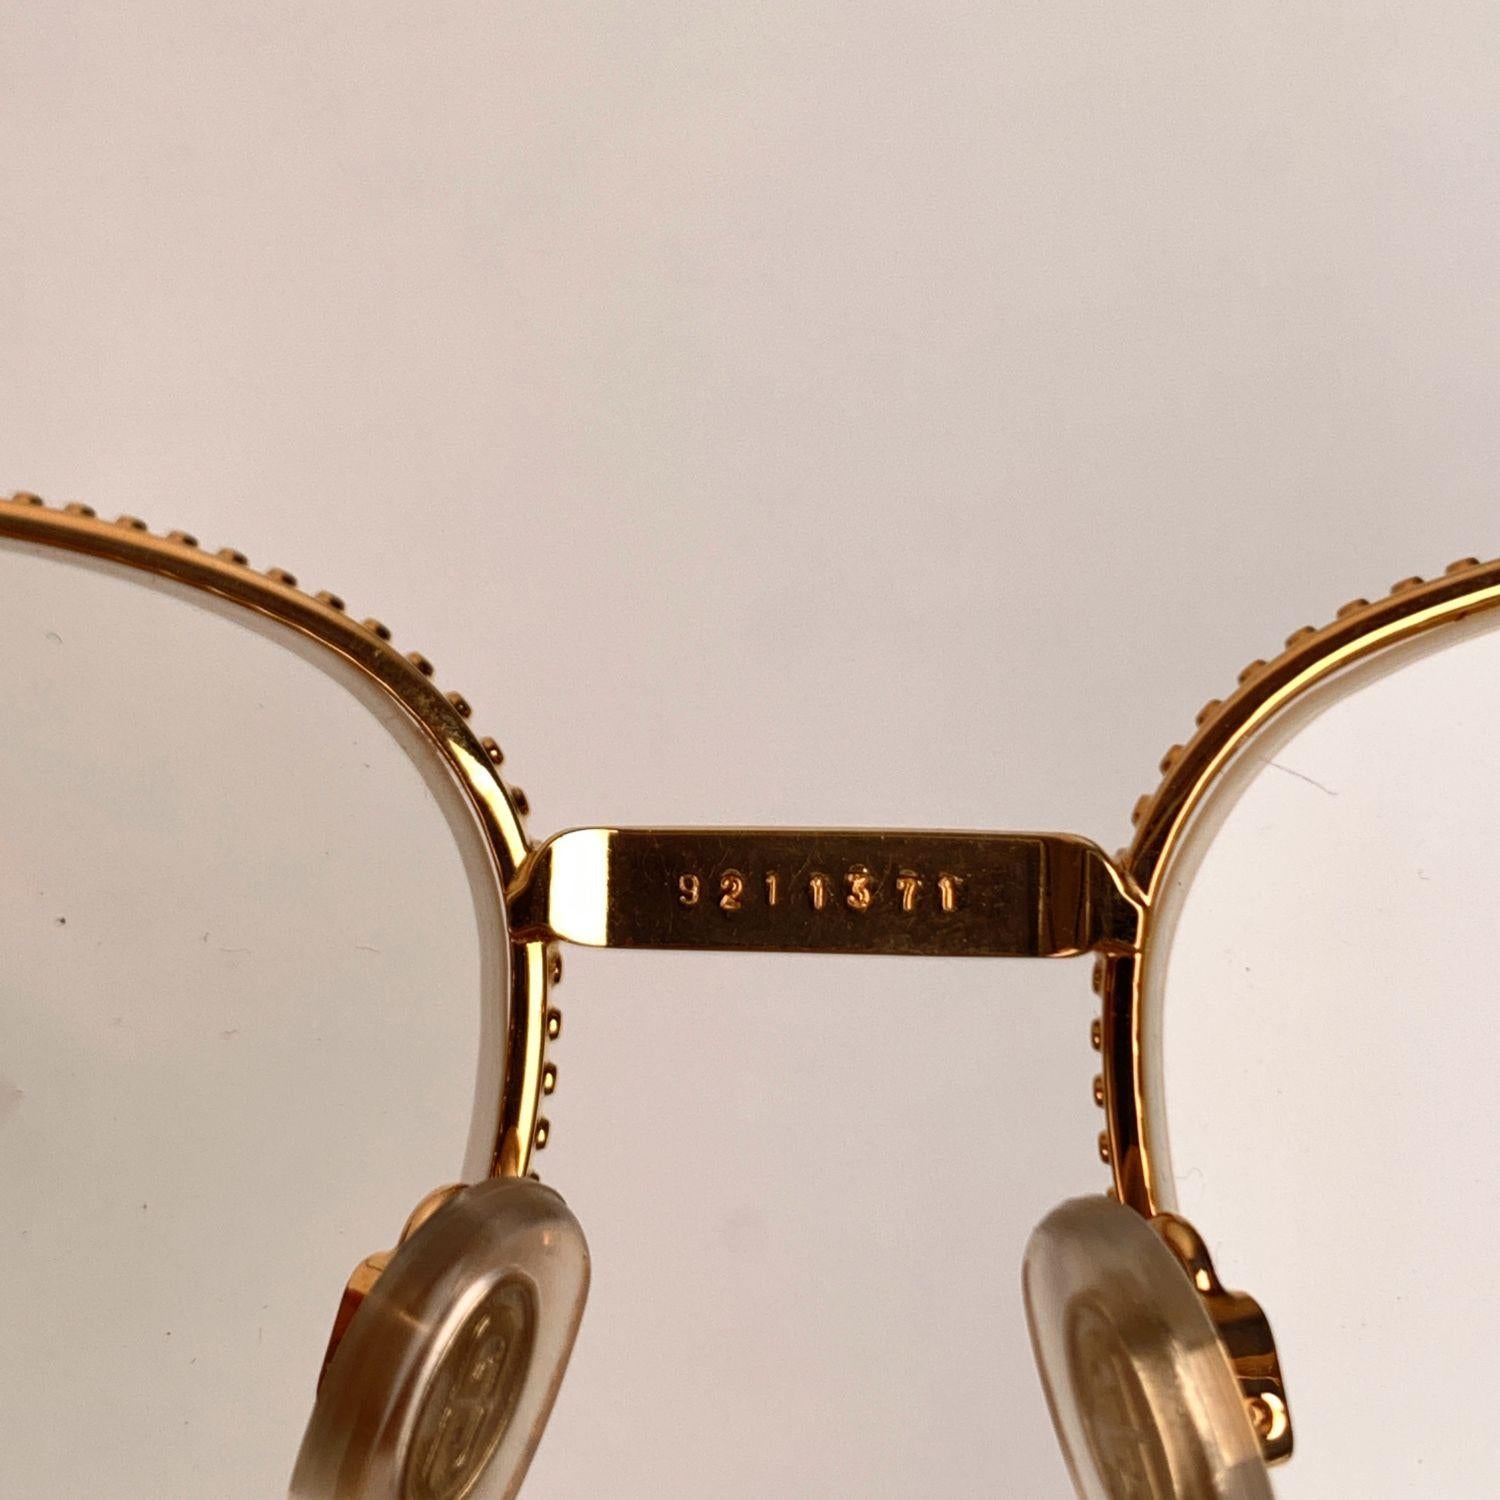 Gerald Genta Vintage Eyeglasses Gold Plated Gefica 03 Frame 140 mm In New Condition In Rome, Rome